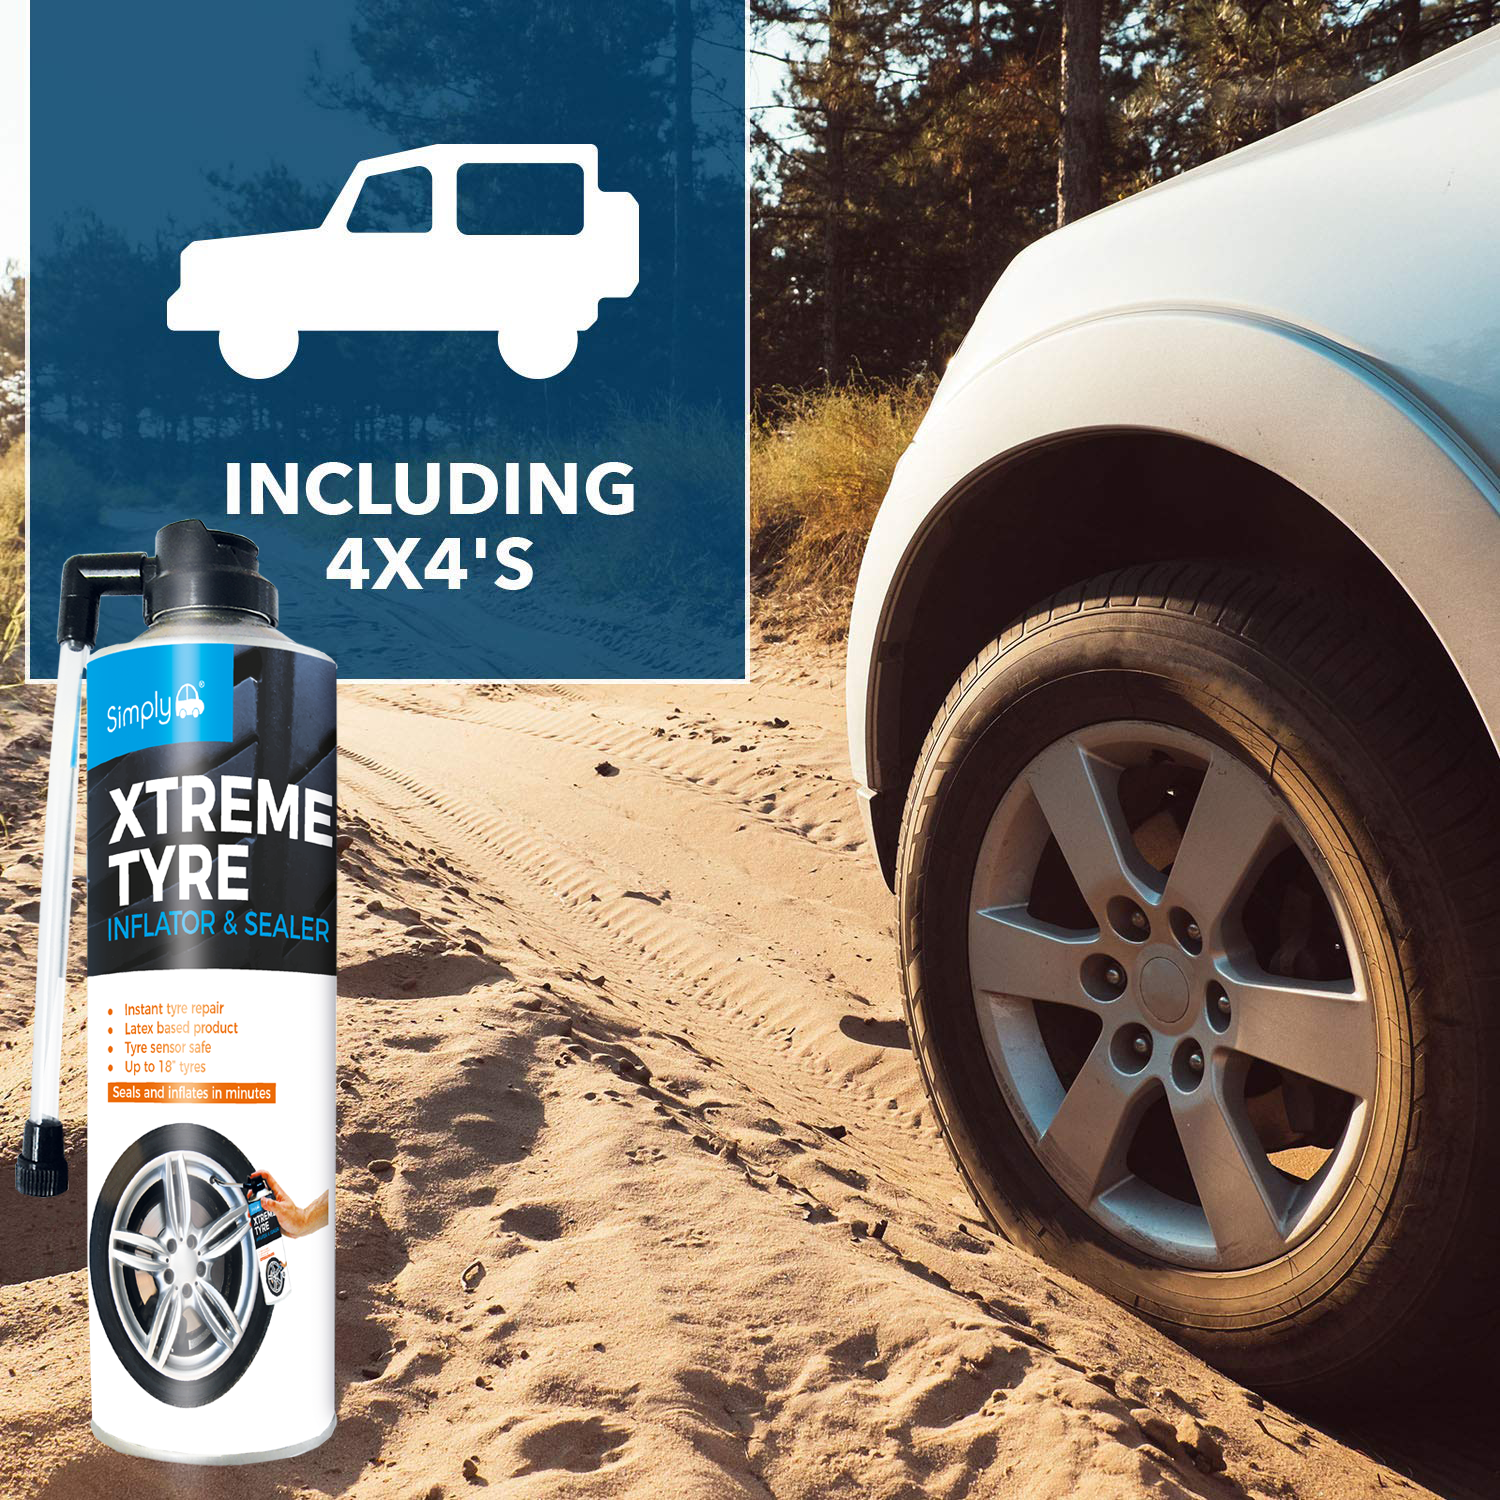 Simply Xtreme Tyre Inflator & Sealer 500ml